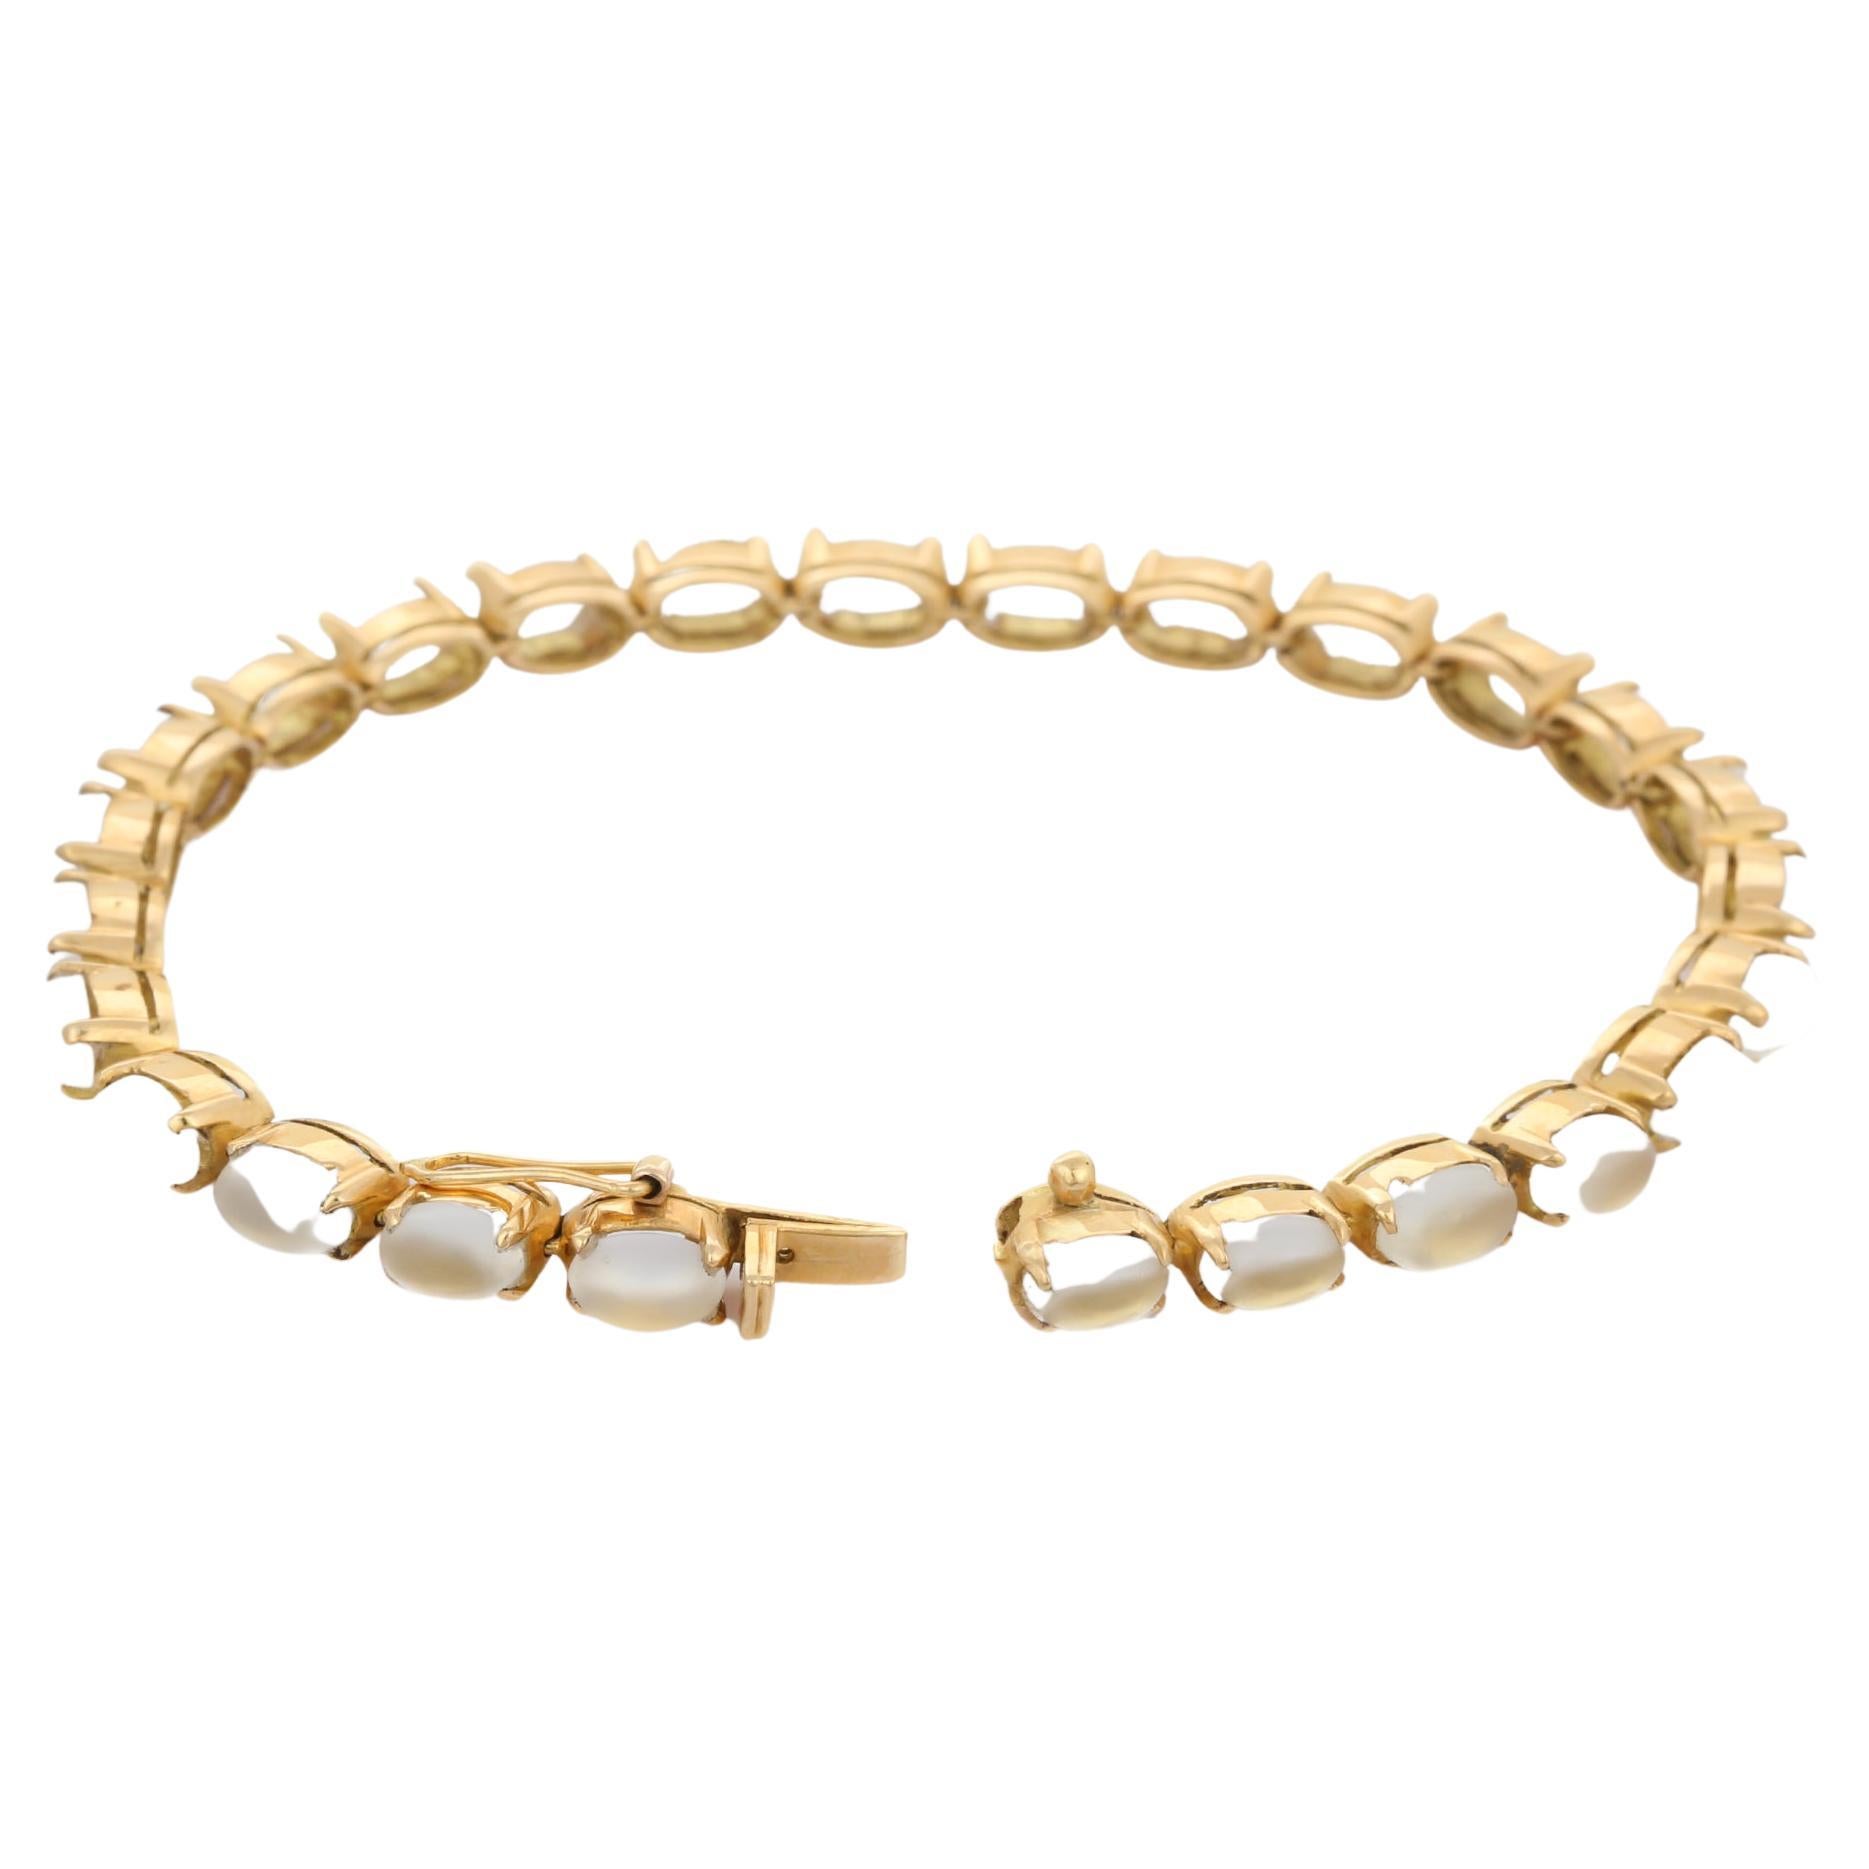 This Rainbow Moonstone Tennis Bracelet in 18K gold showcases 26 endlessly sparkling natural rainbow moonstone, weighing 15 carats. It measures 7.25 inches long in length. 
Rainbow moonstone brings balance, harmony and hope.
Designed with perfect